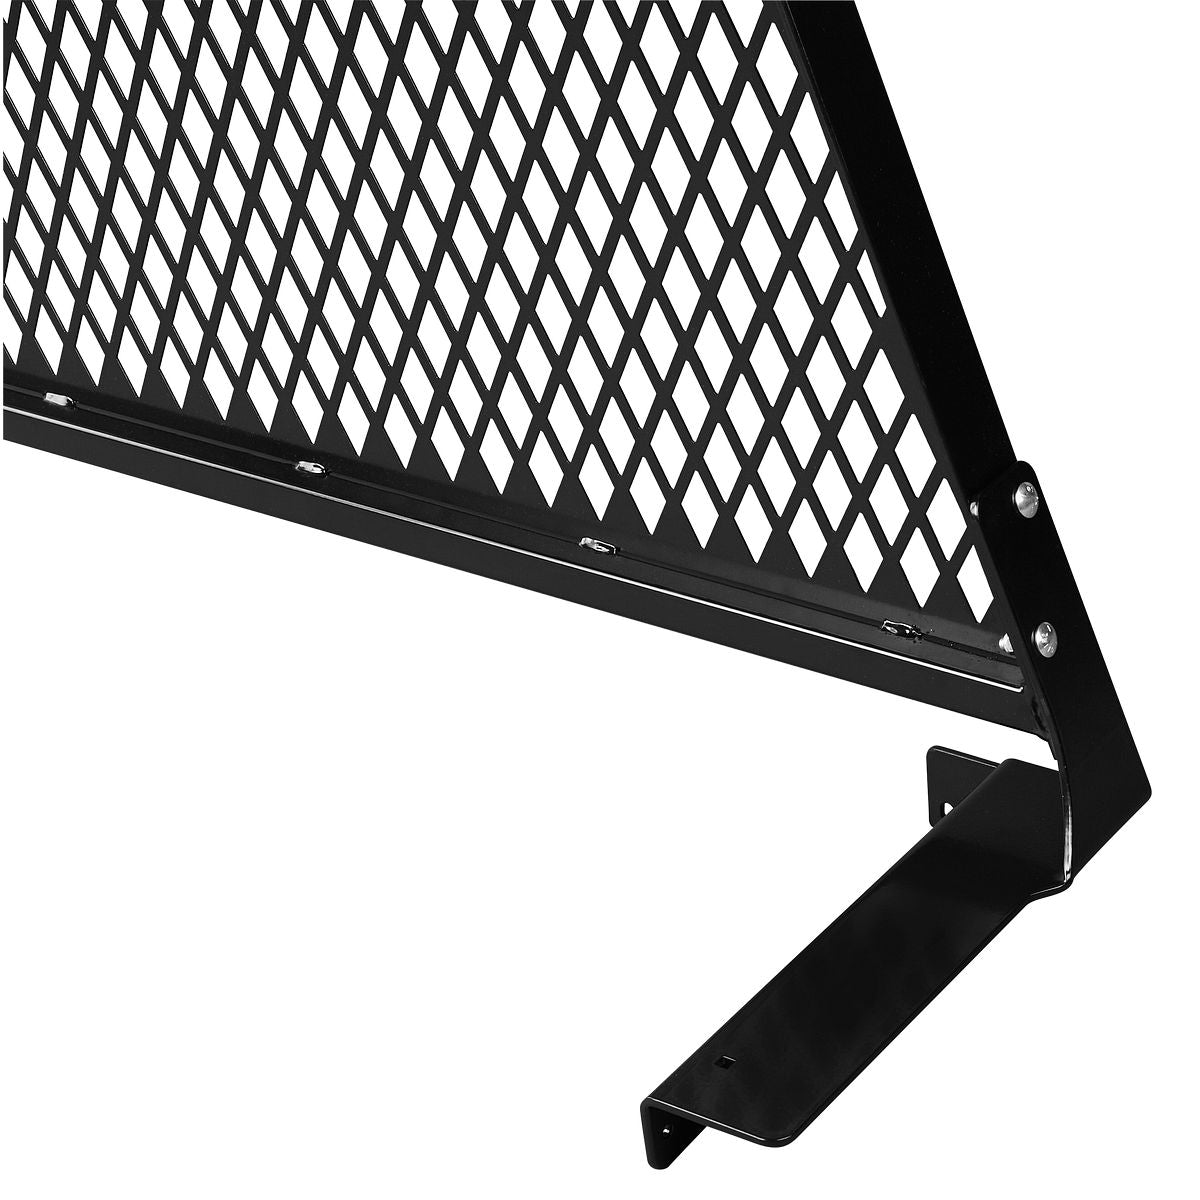 American Ladders & Scaffolds, 15+ Compact GM Cab Protector Mounting Kit - Steel, Gloss Black Finish